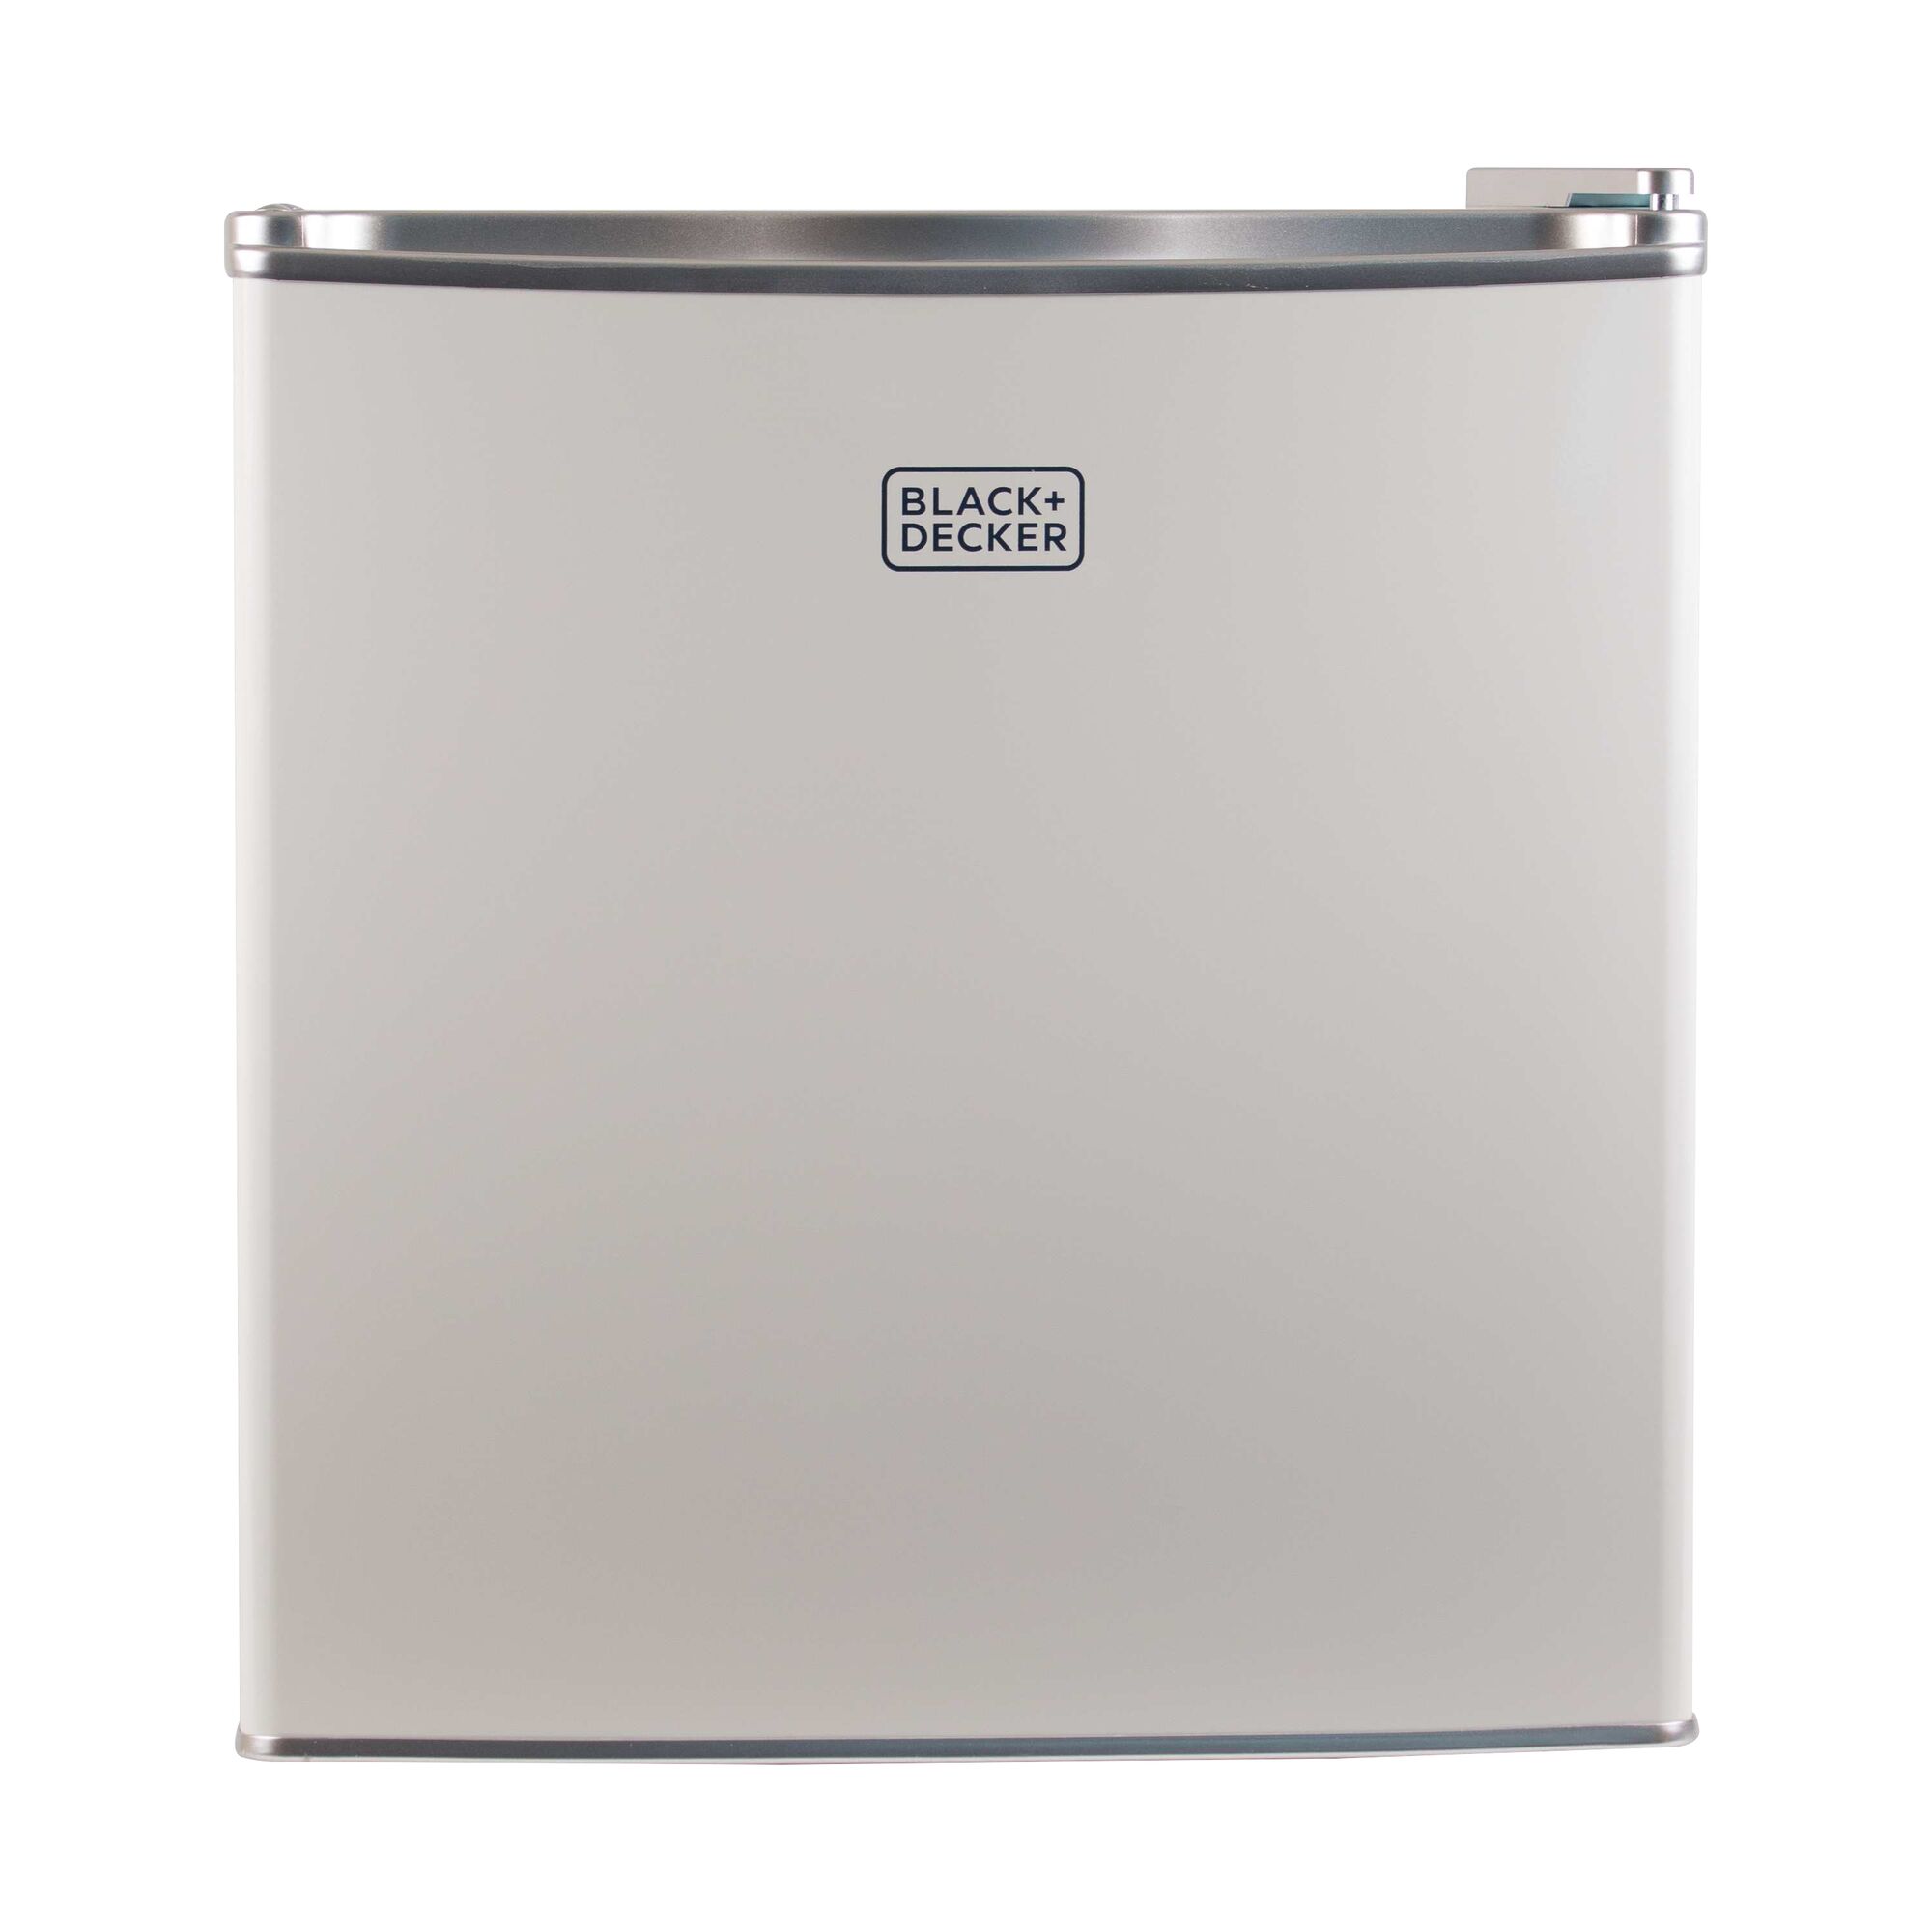 1.7 Cubic Foot Energy Star Refrigerator with Freezer.